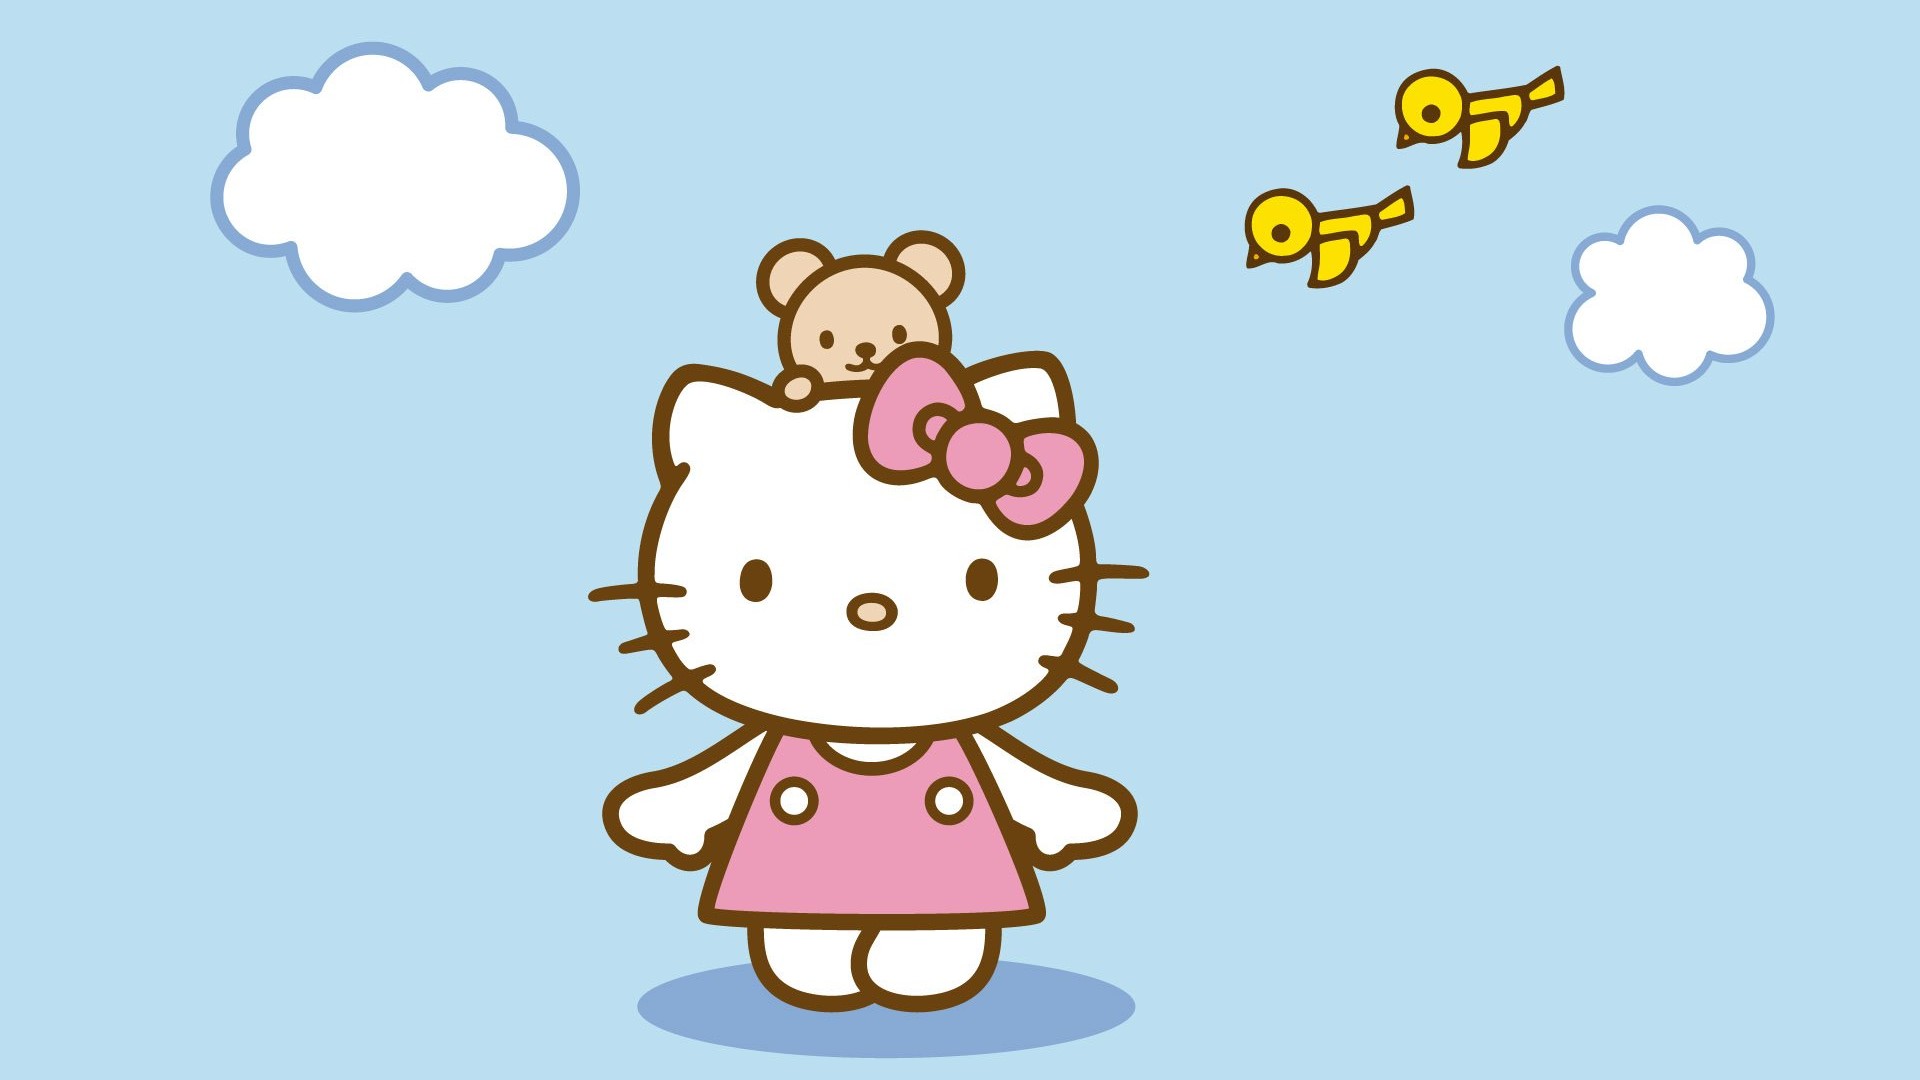 Desktop Wallpaper Hello Kitty Images with resolution 1920X1080 pixel. You can use this wallpaper as background for your desktop Computer Screensavers, Android or iPhone smartphones